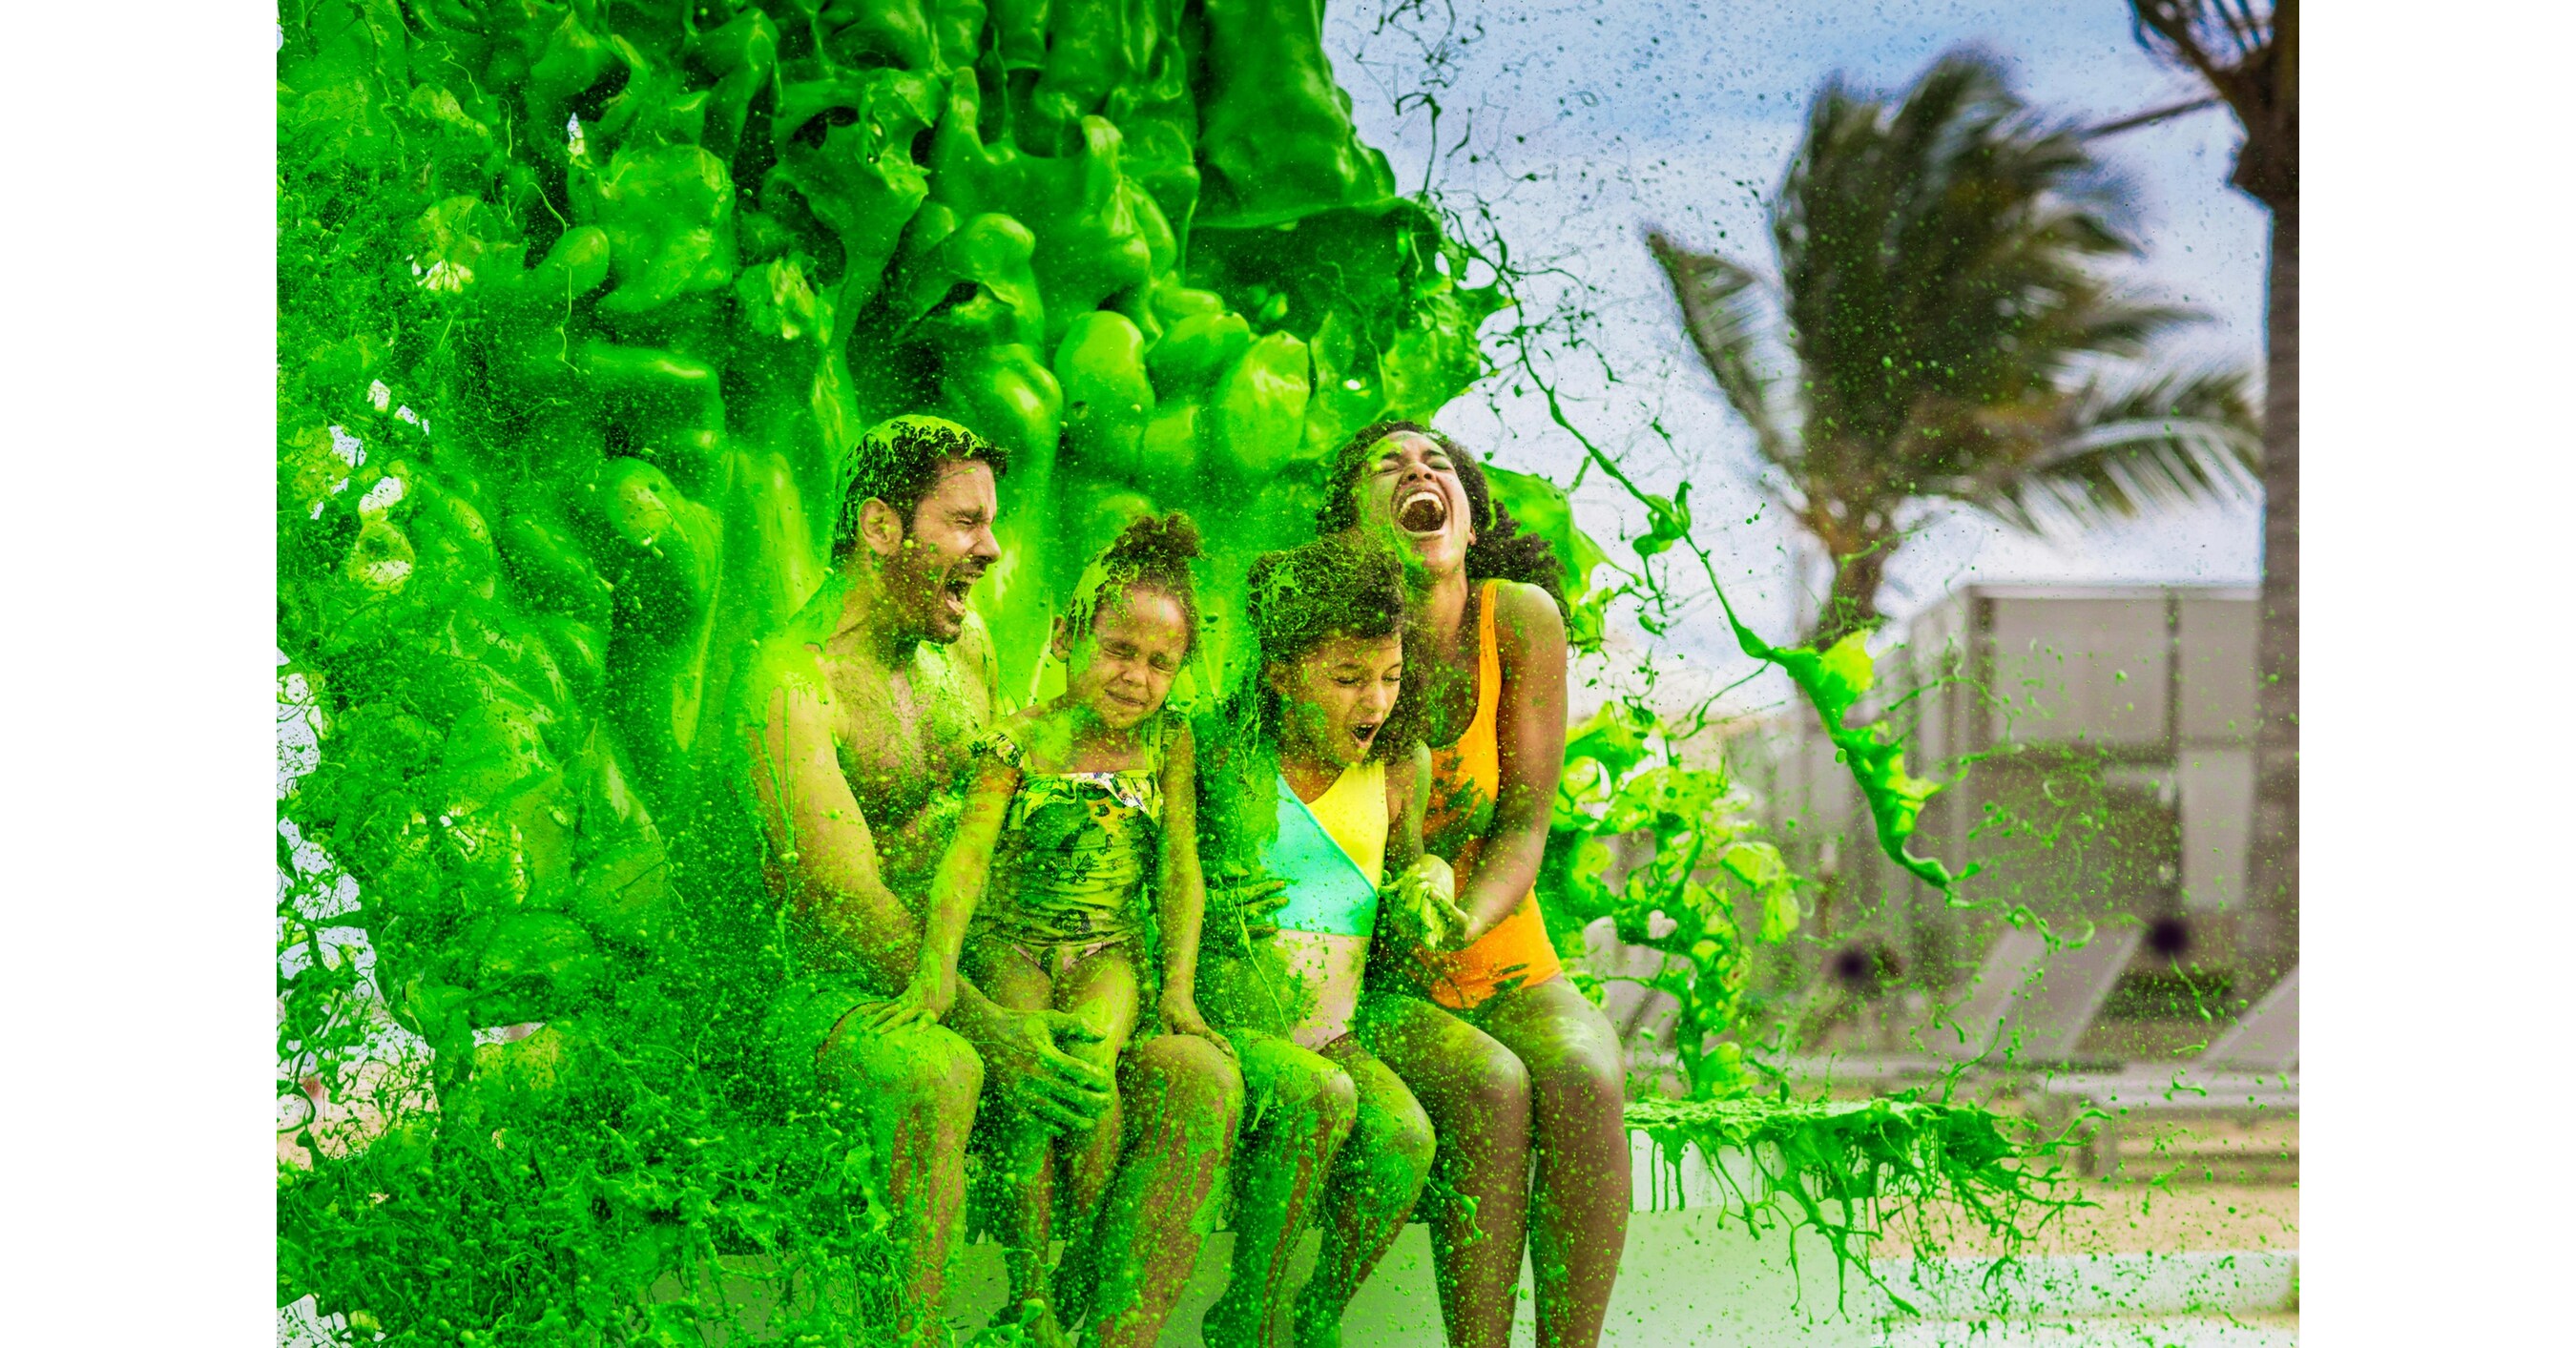 Getting Slimed and Stuff at Nickelodeon Punta Cana - Life is too